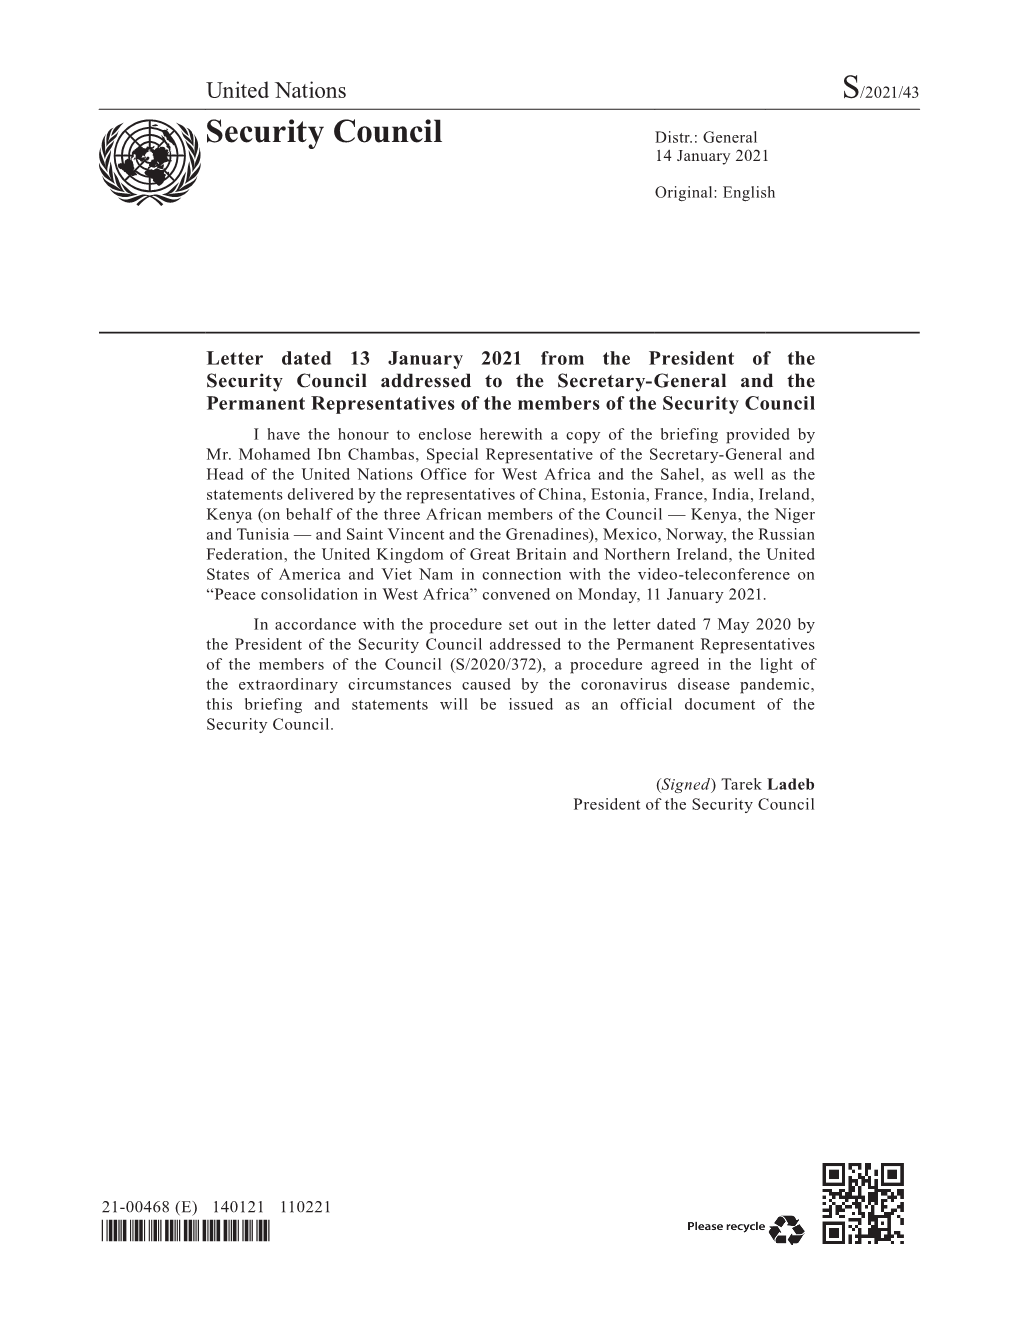 Letter Dated 13 January 2021 from the President of the Security Council